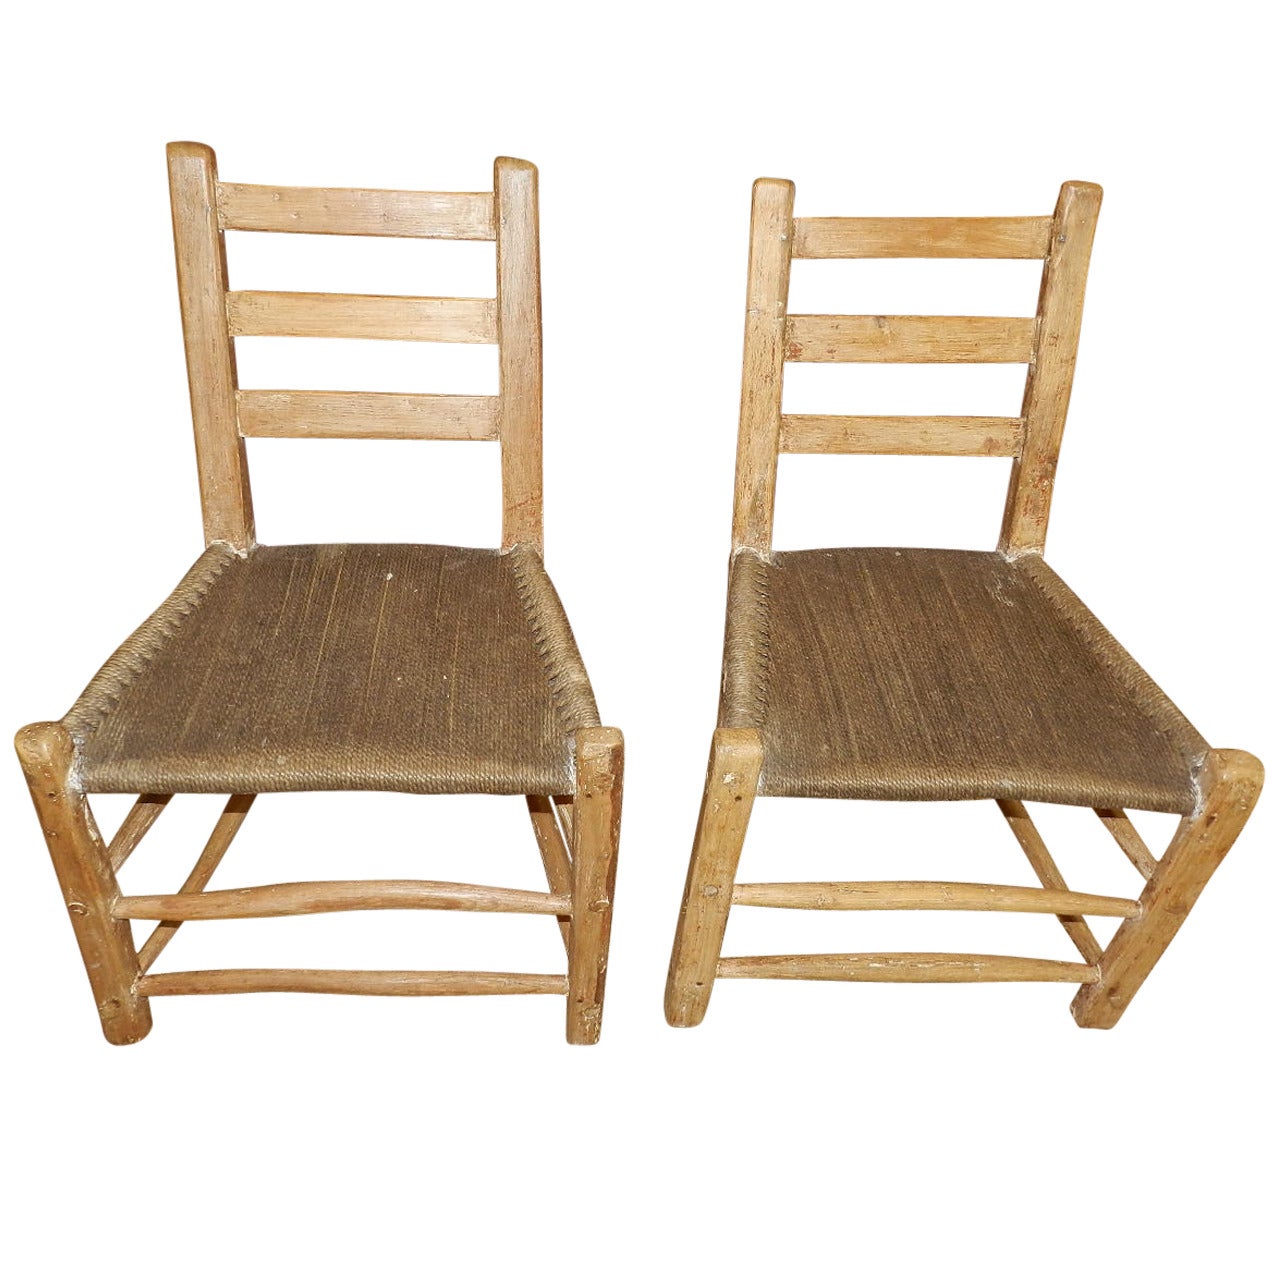 Scottish Orkney Island Chairs For Sale